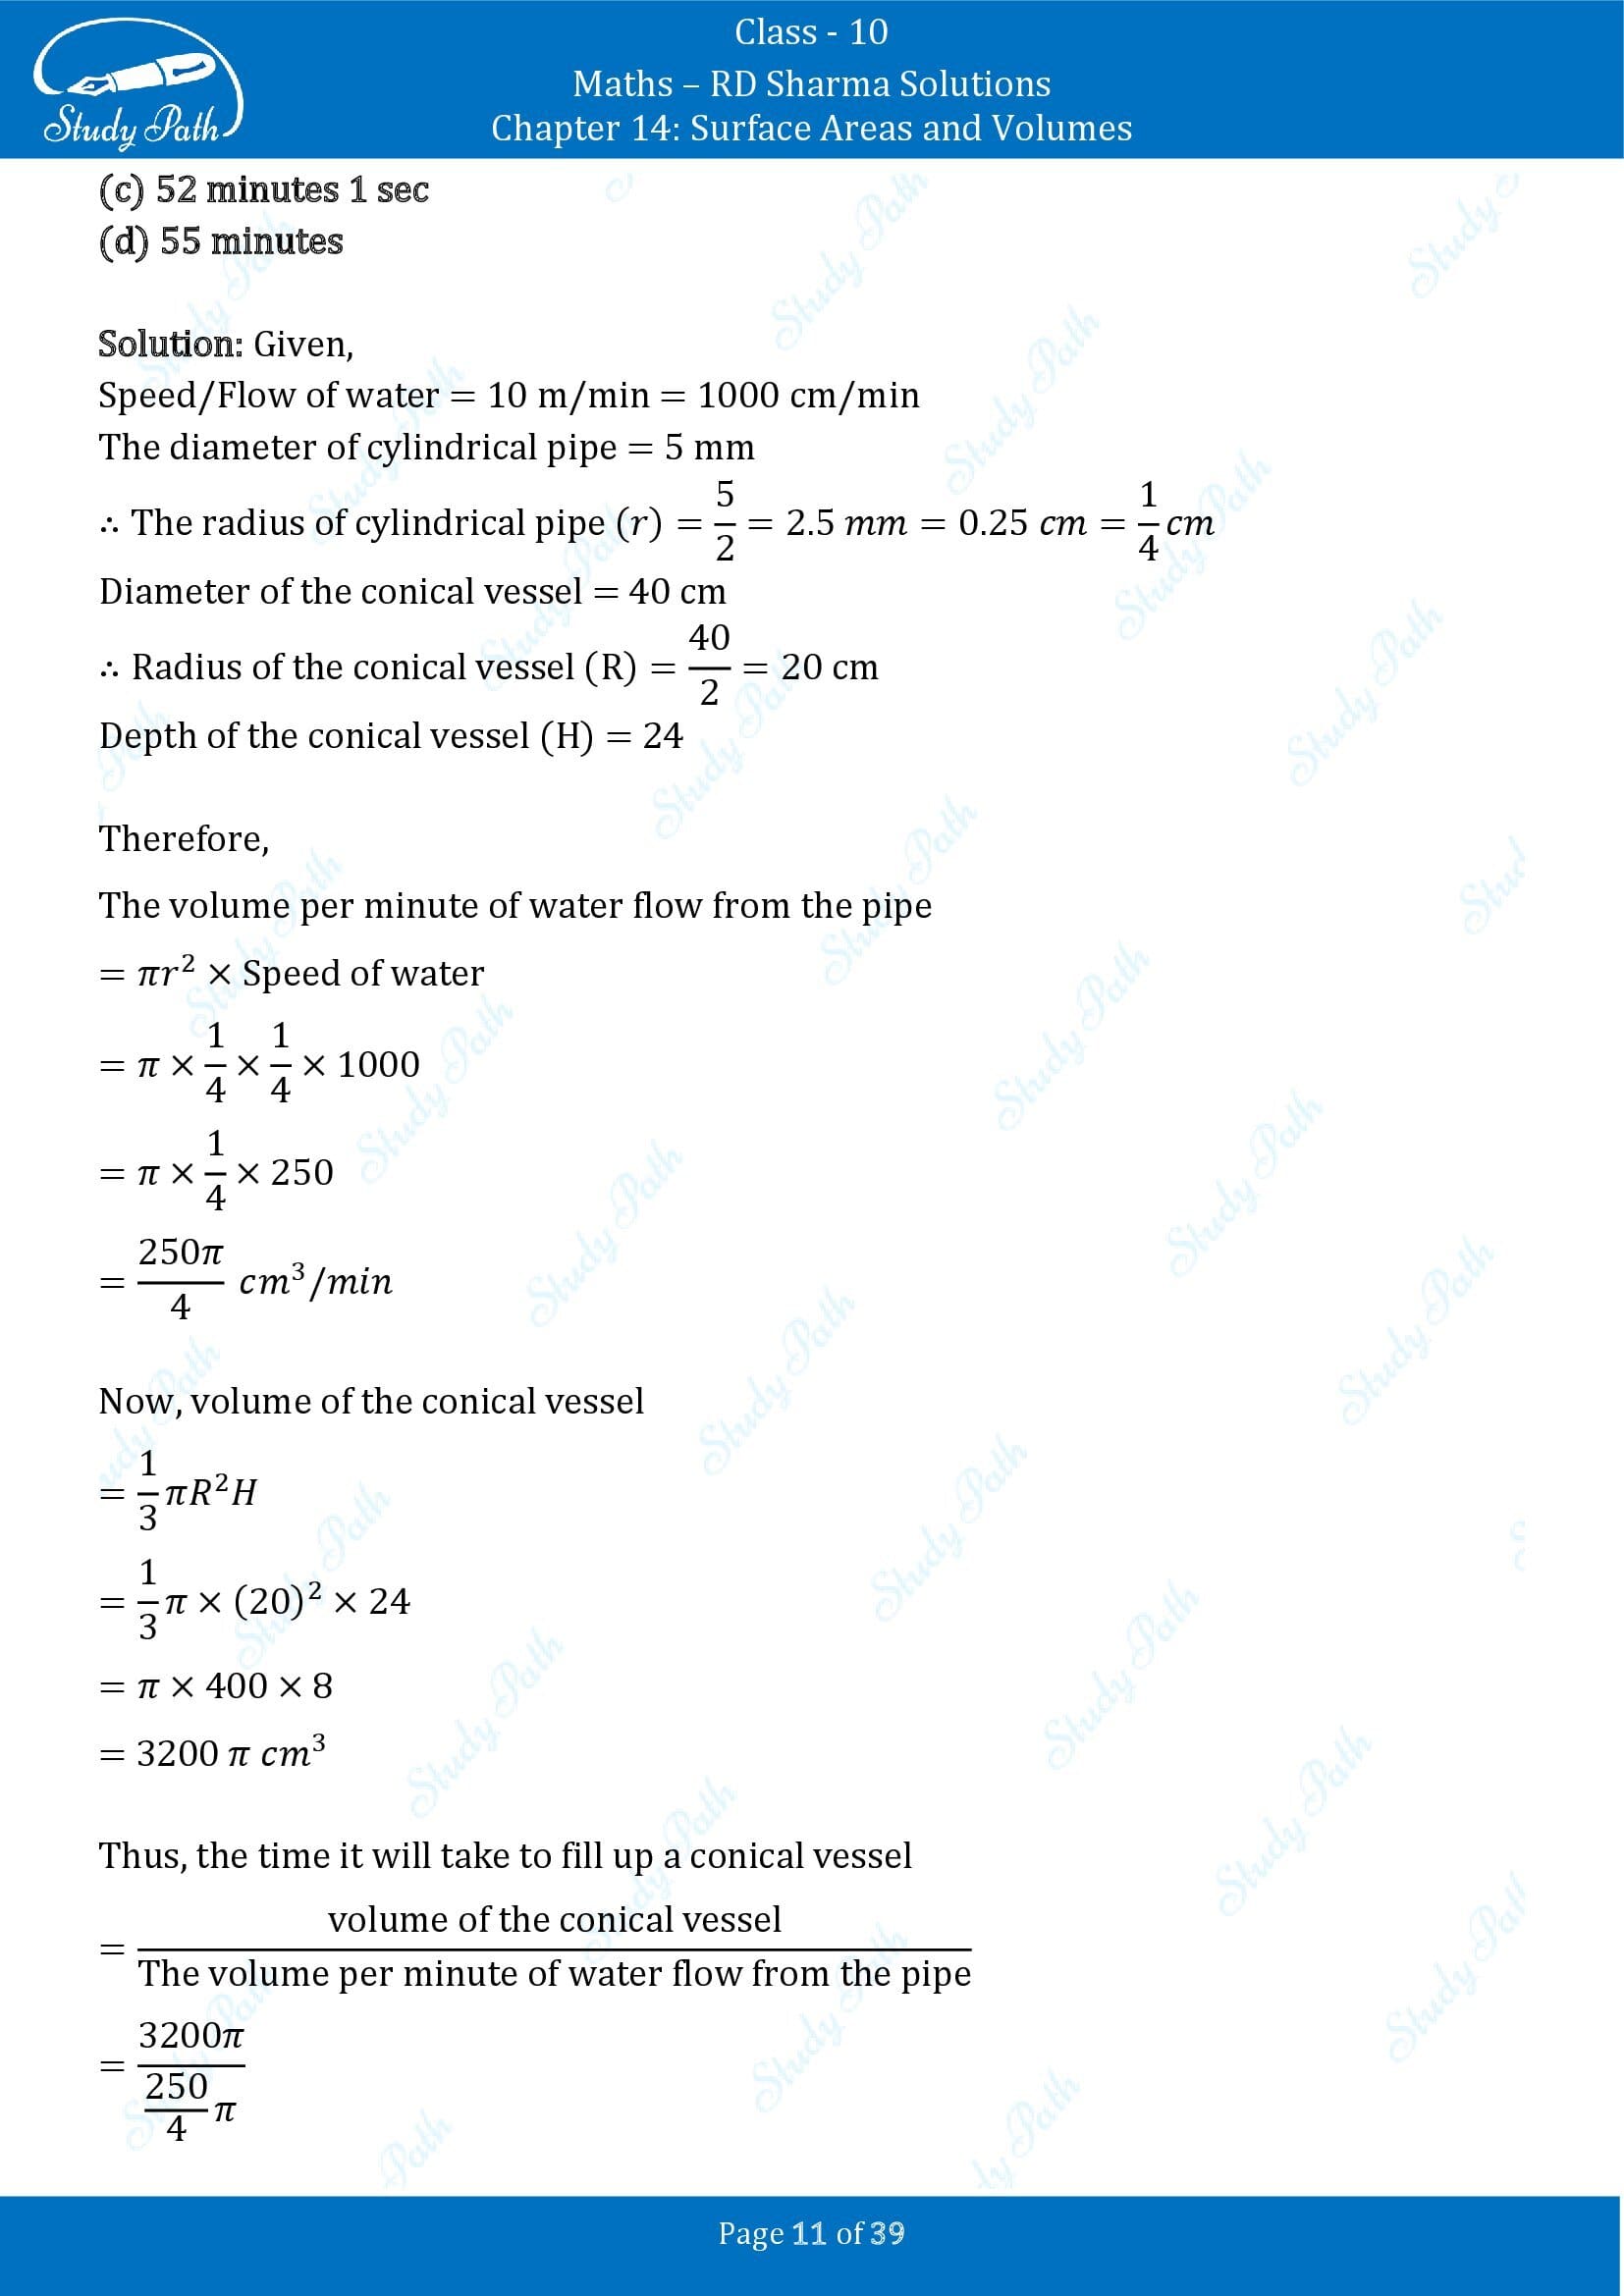 RD Sharma Solutions Class 10 Chapter 14 Surface Areas and Volumes Multiple Choice Question MCQs 00011